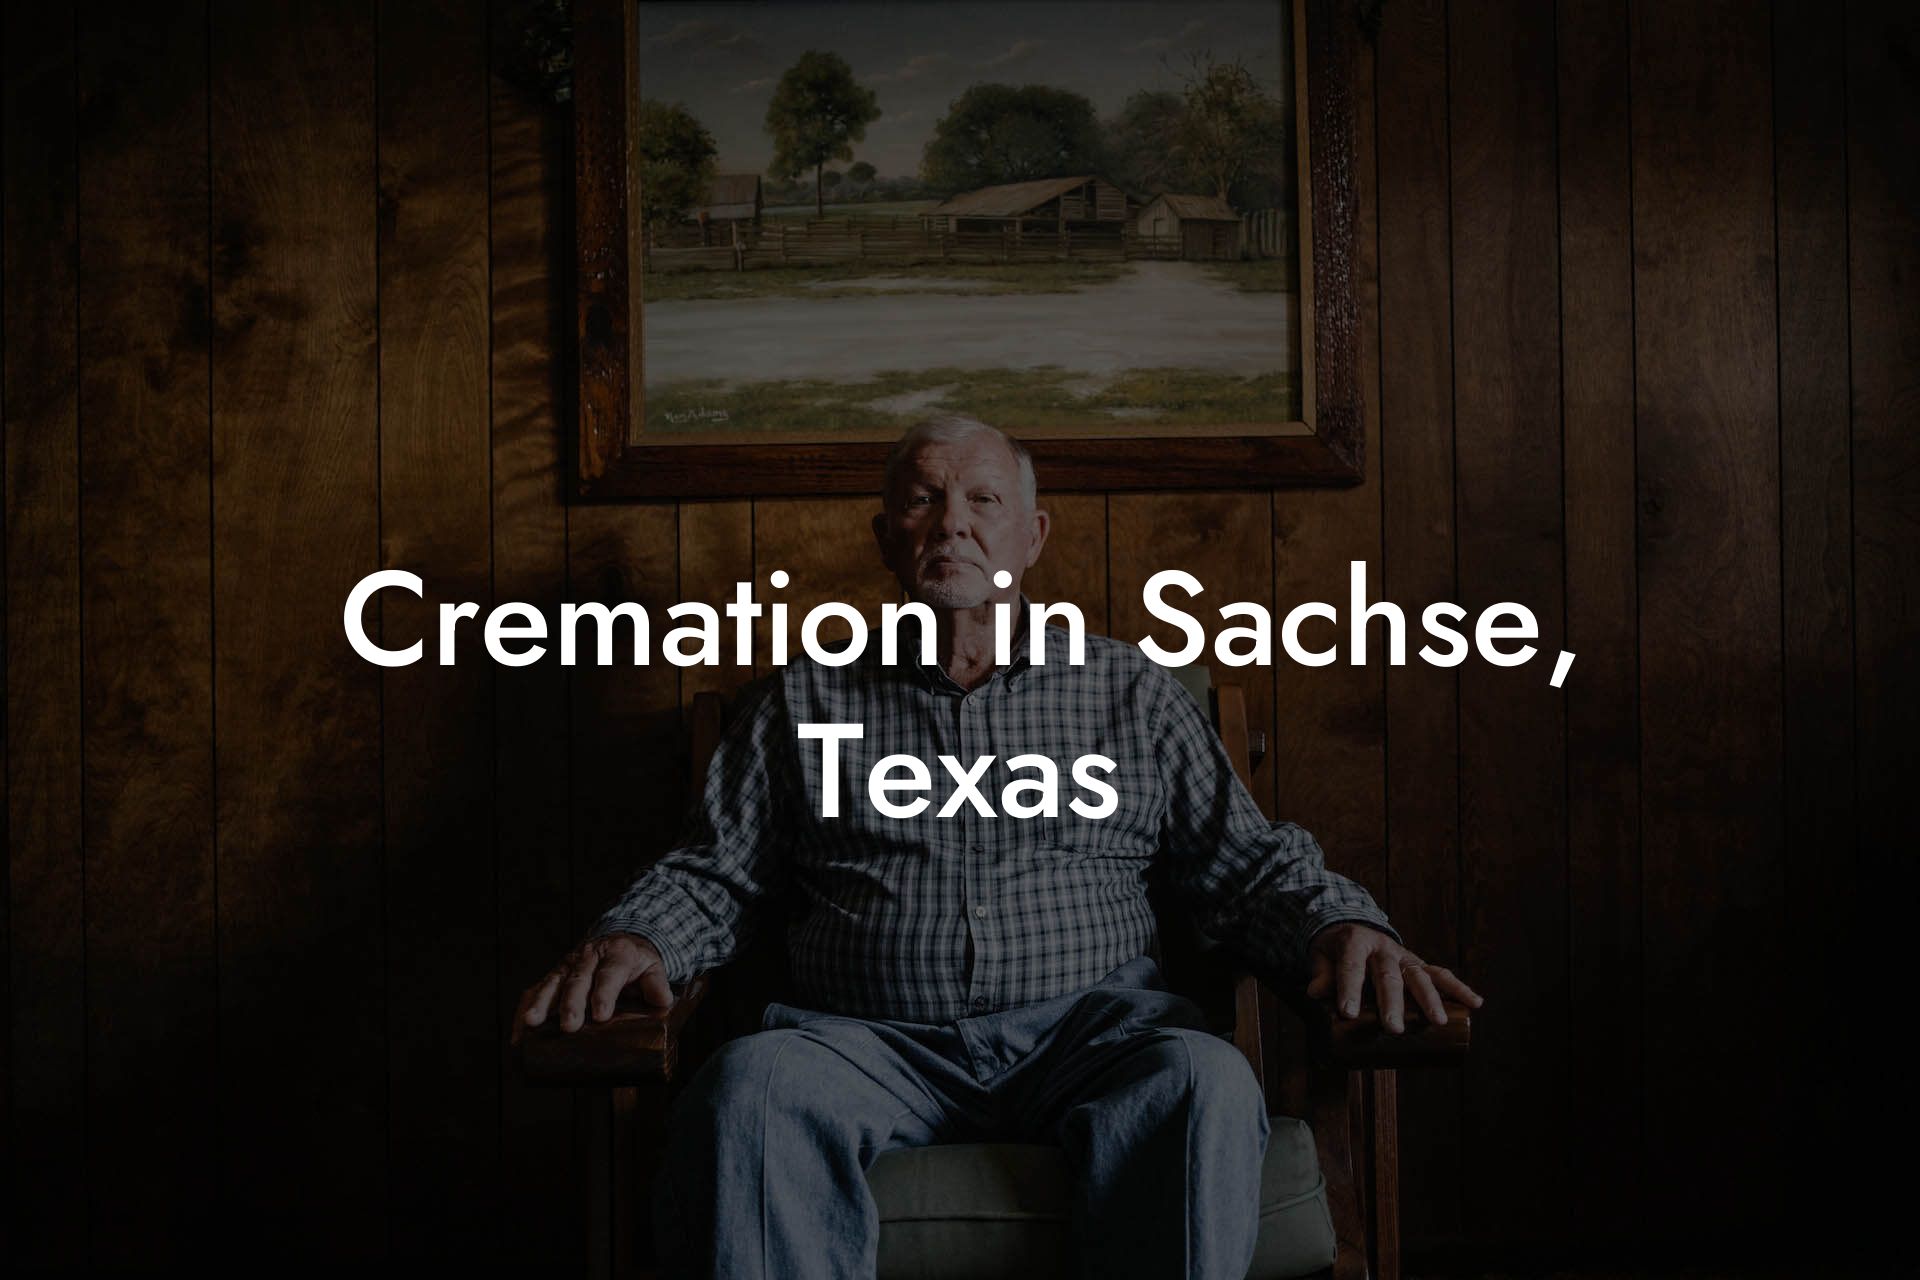 Cremation in Sachse, Texas